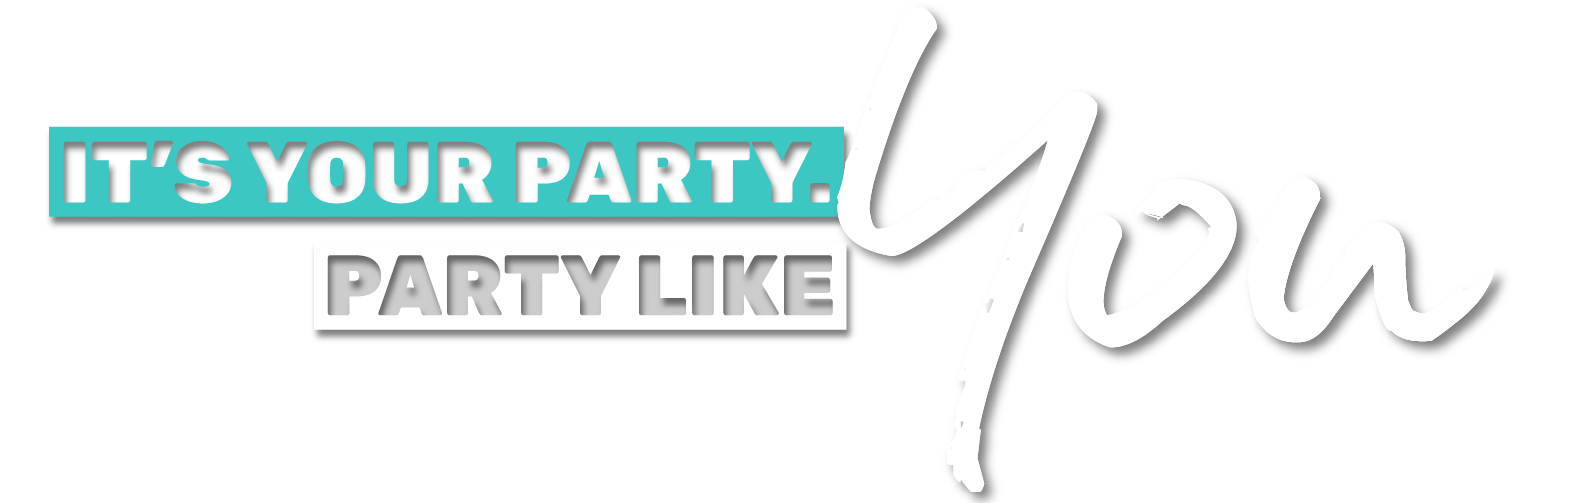 Party with Complete Grand Rapids